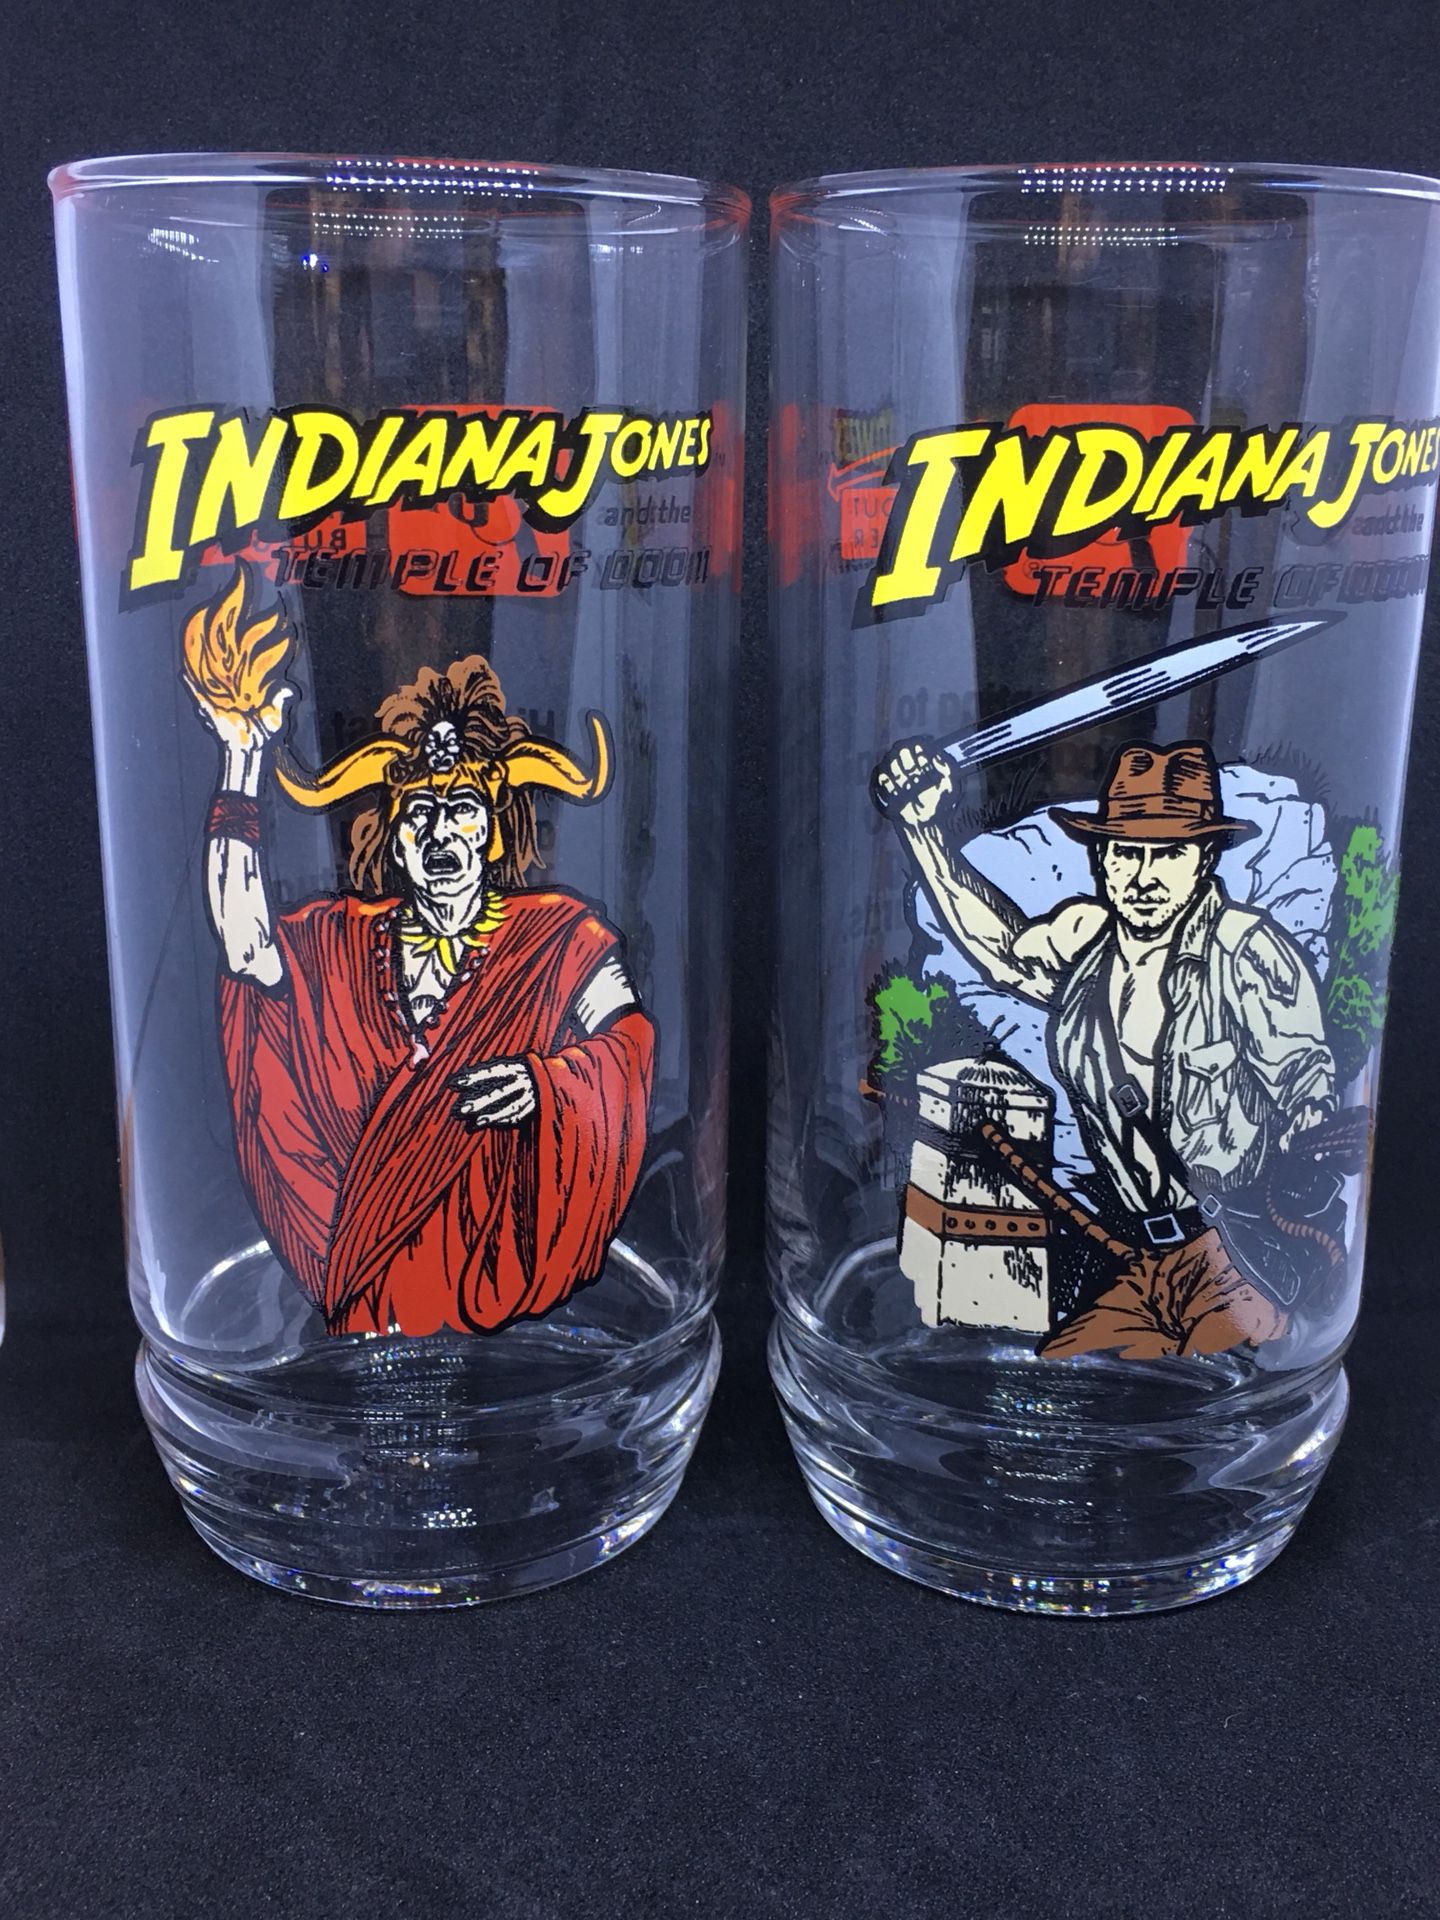 7up In-N-out Burger Indiana Jones and Temple of Doom movie glasses set